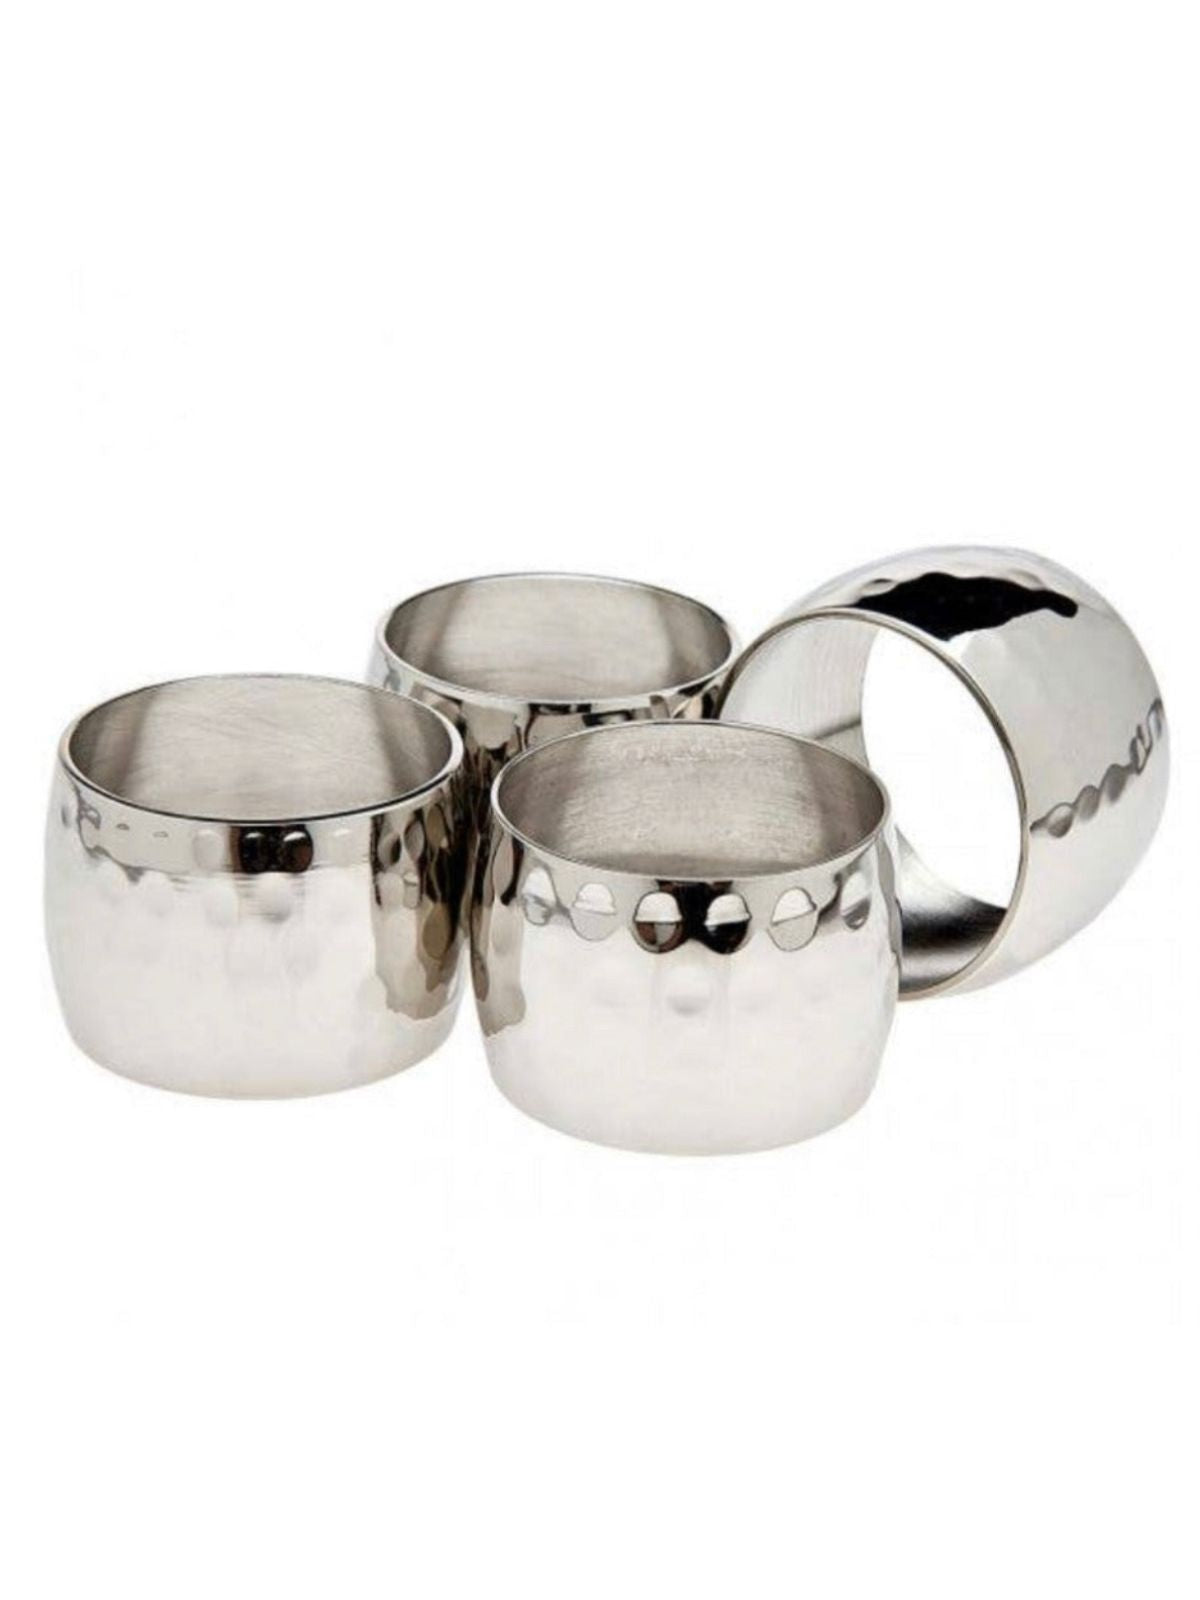 Set of 4 Round Hammered Silver Napkin Rings sold by KYA Home Decor. 